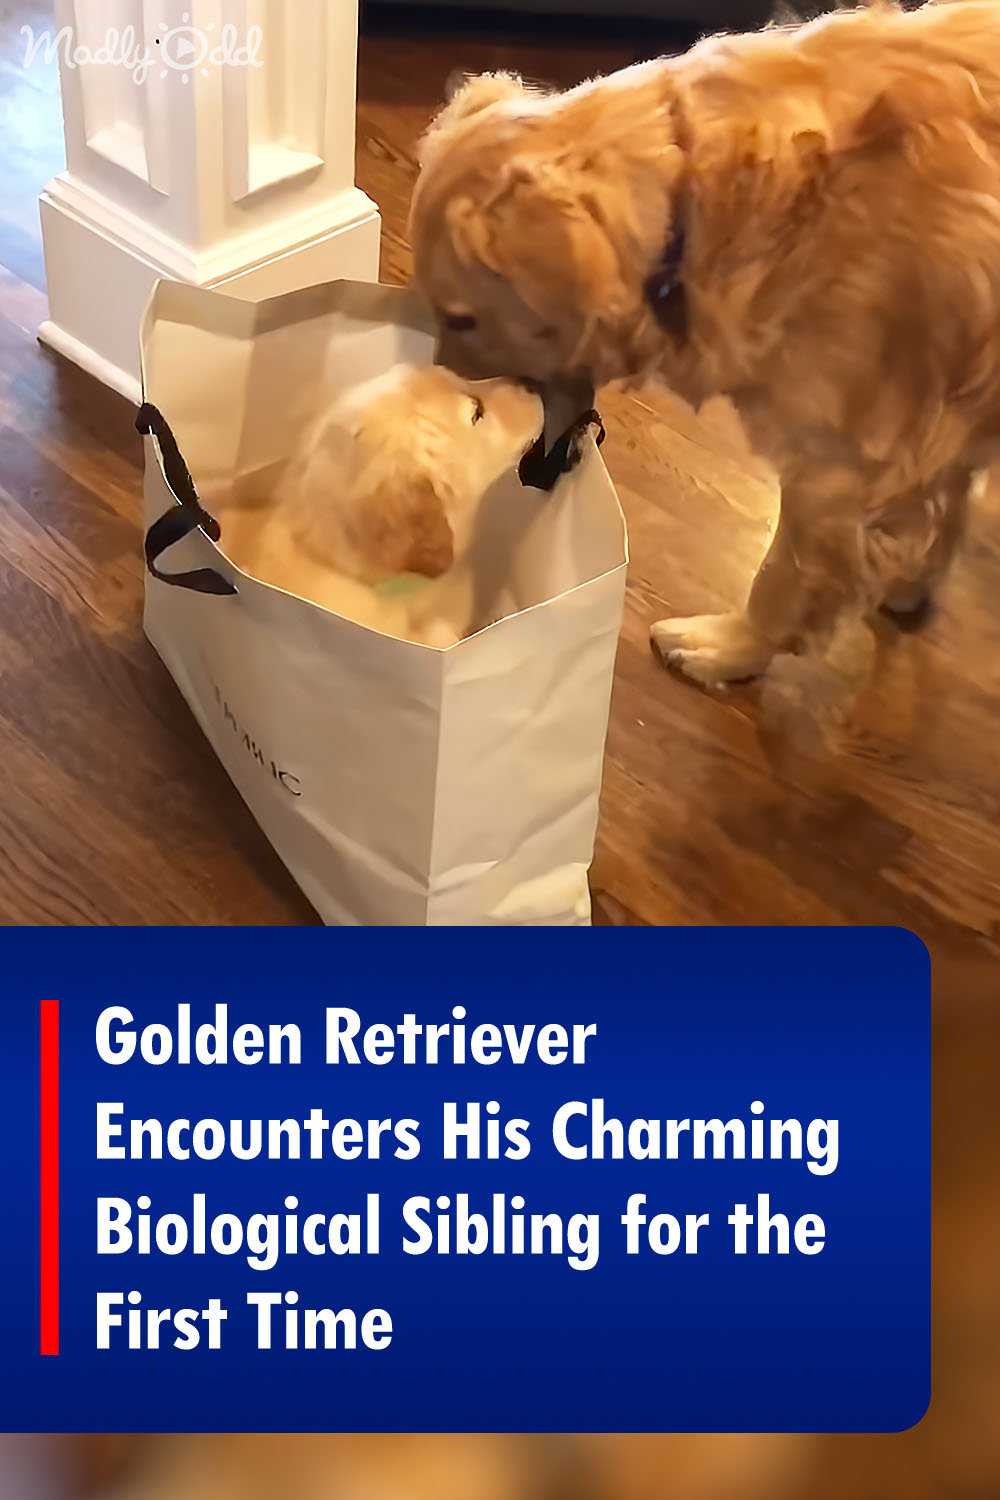 Golden Retriever Encounters His Charming Biological Sibling for the First Time